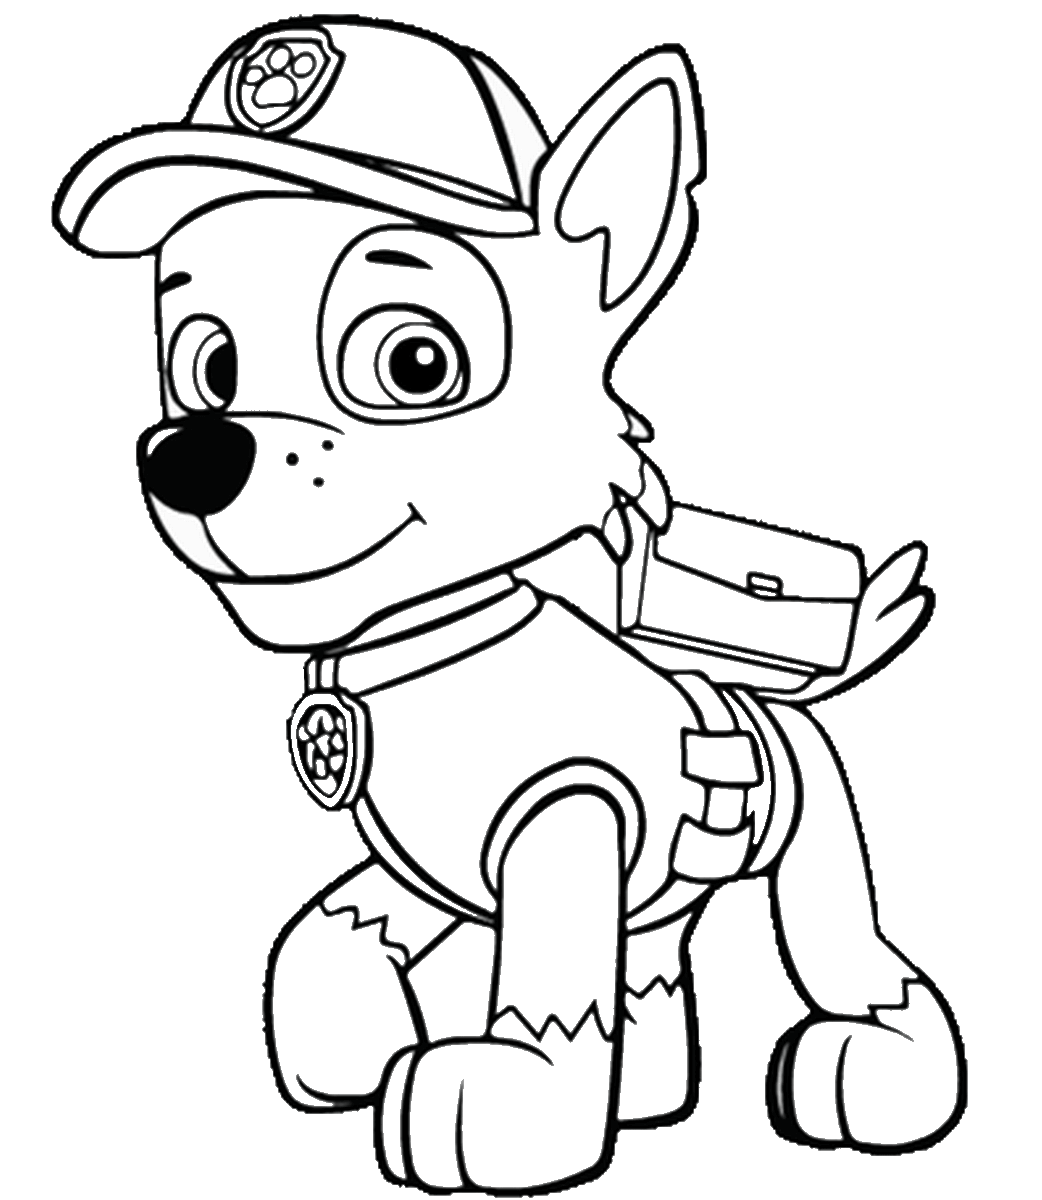 Paw Patrol Coloring Pages - Rocky